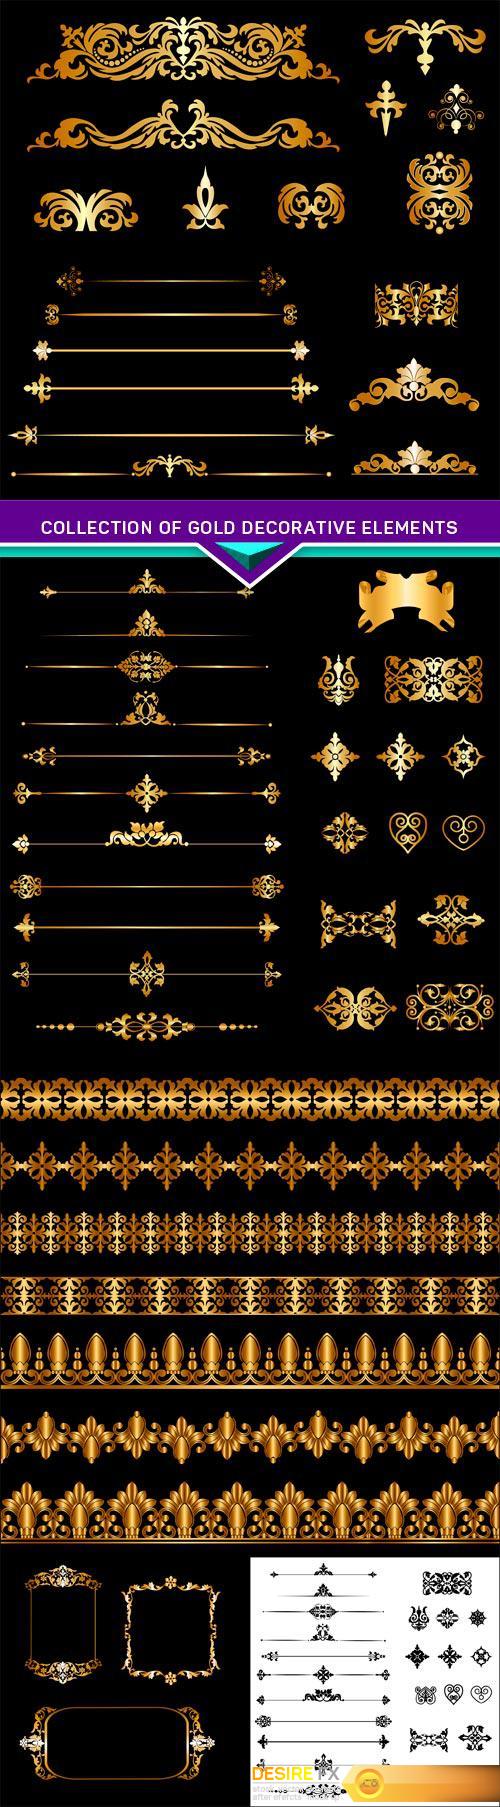 Collection of gold decorative borders and dividers elements 5X EPS